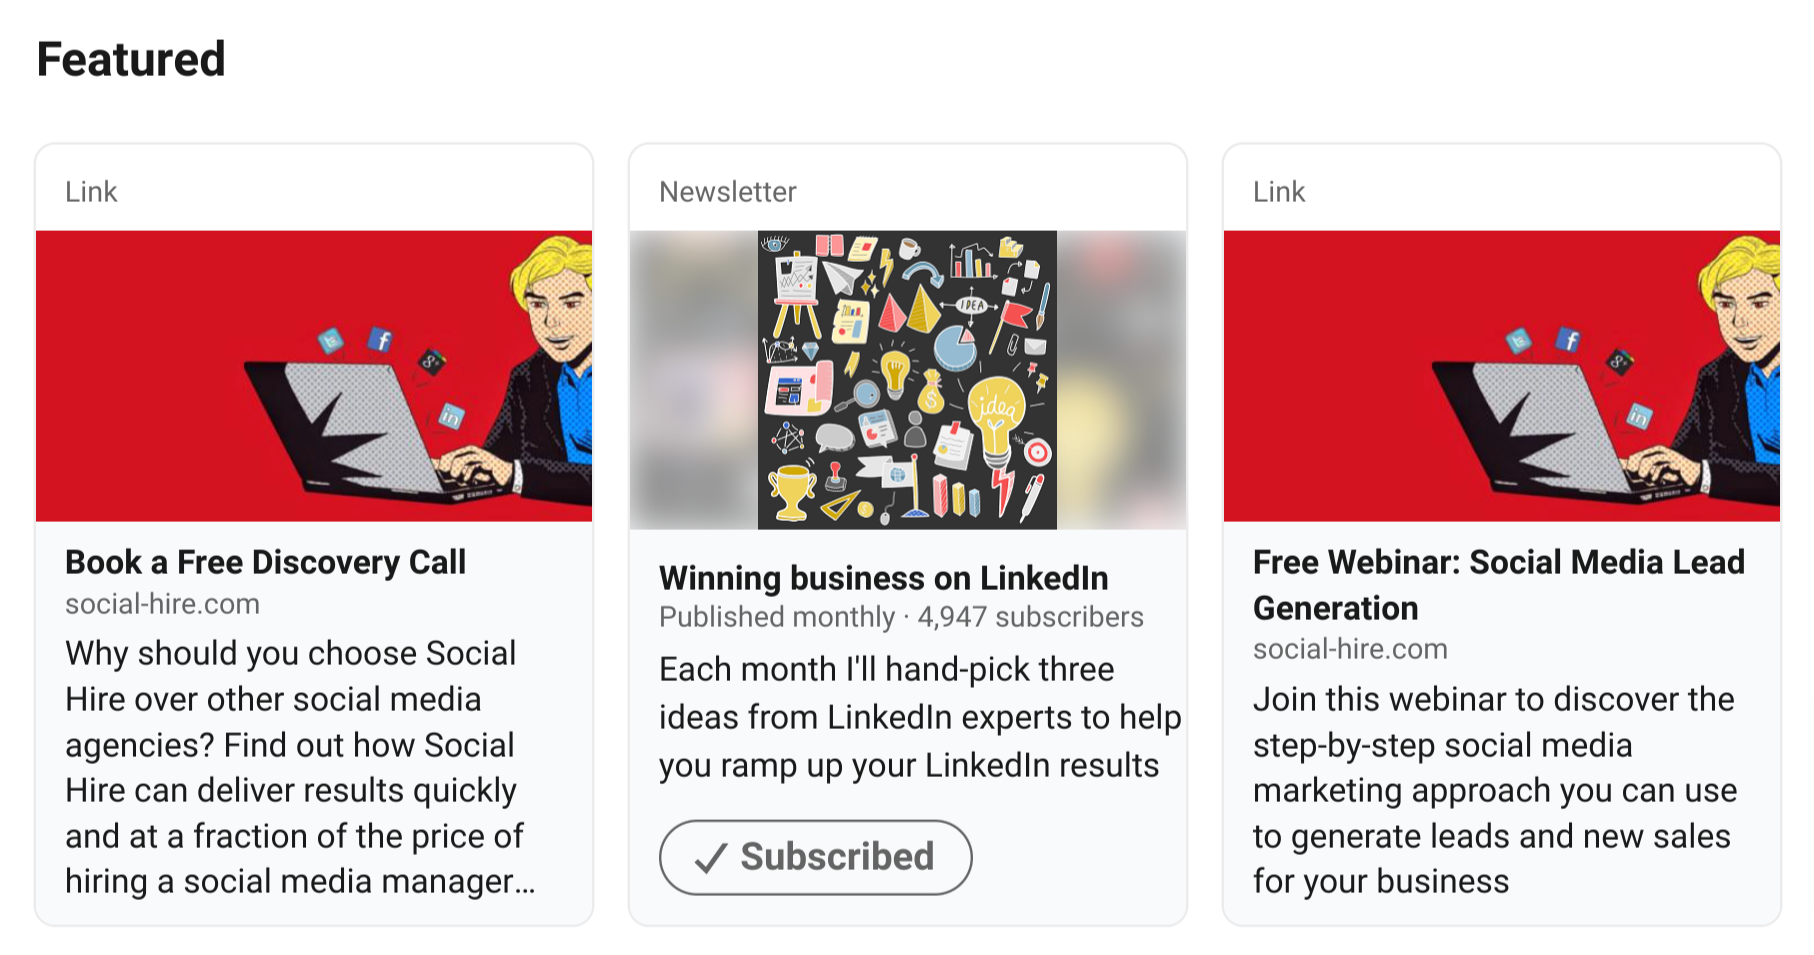 LinkedIn-Featured-Section-1